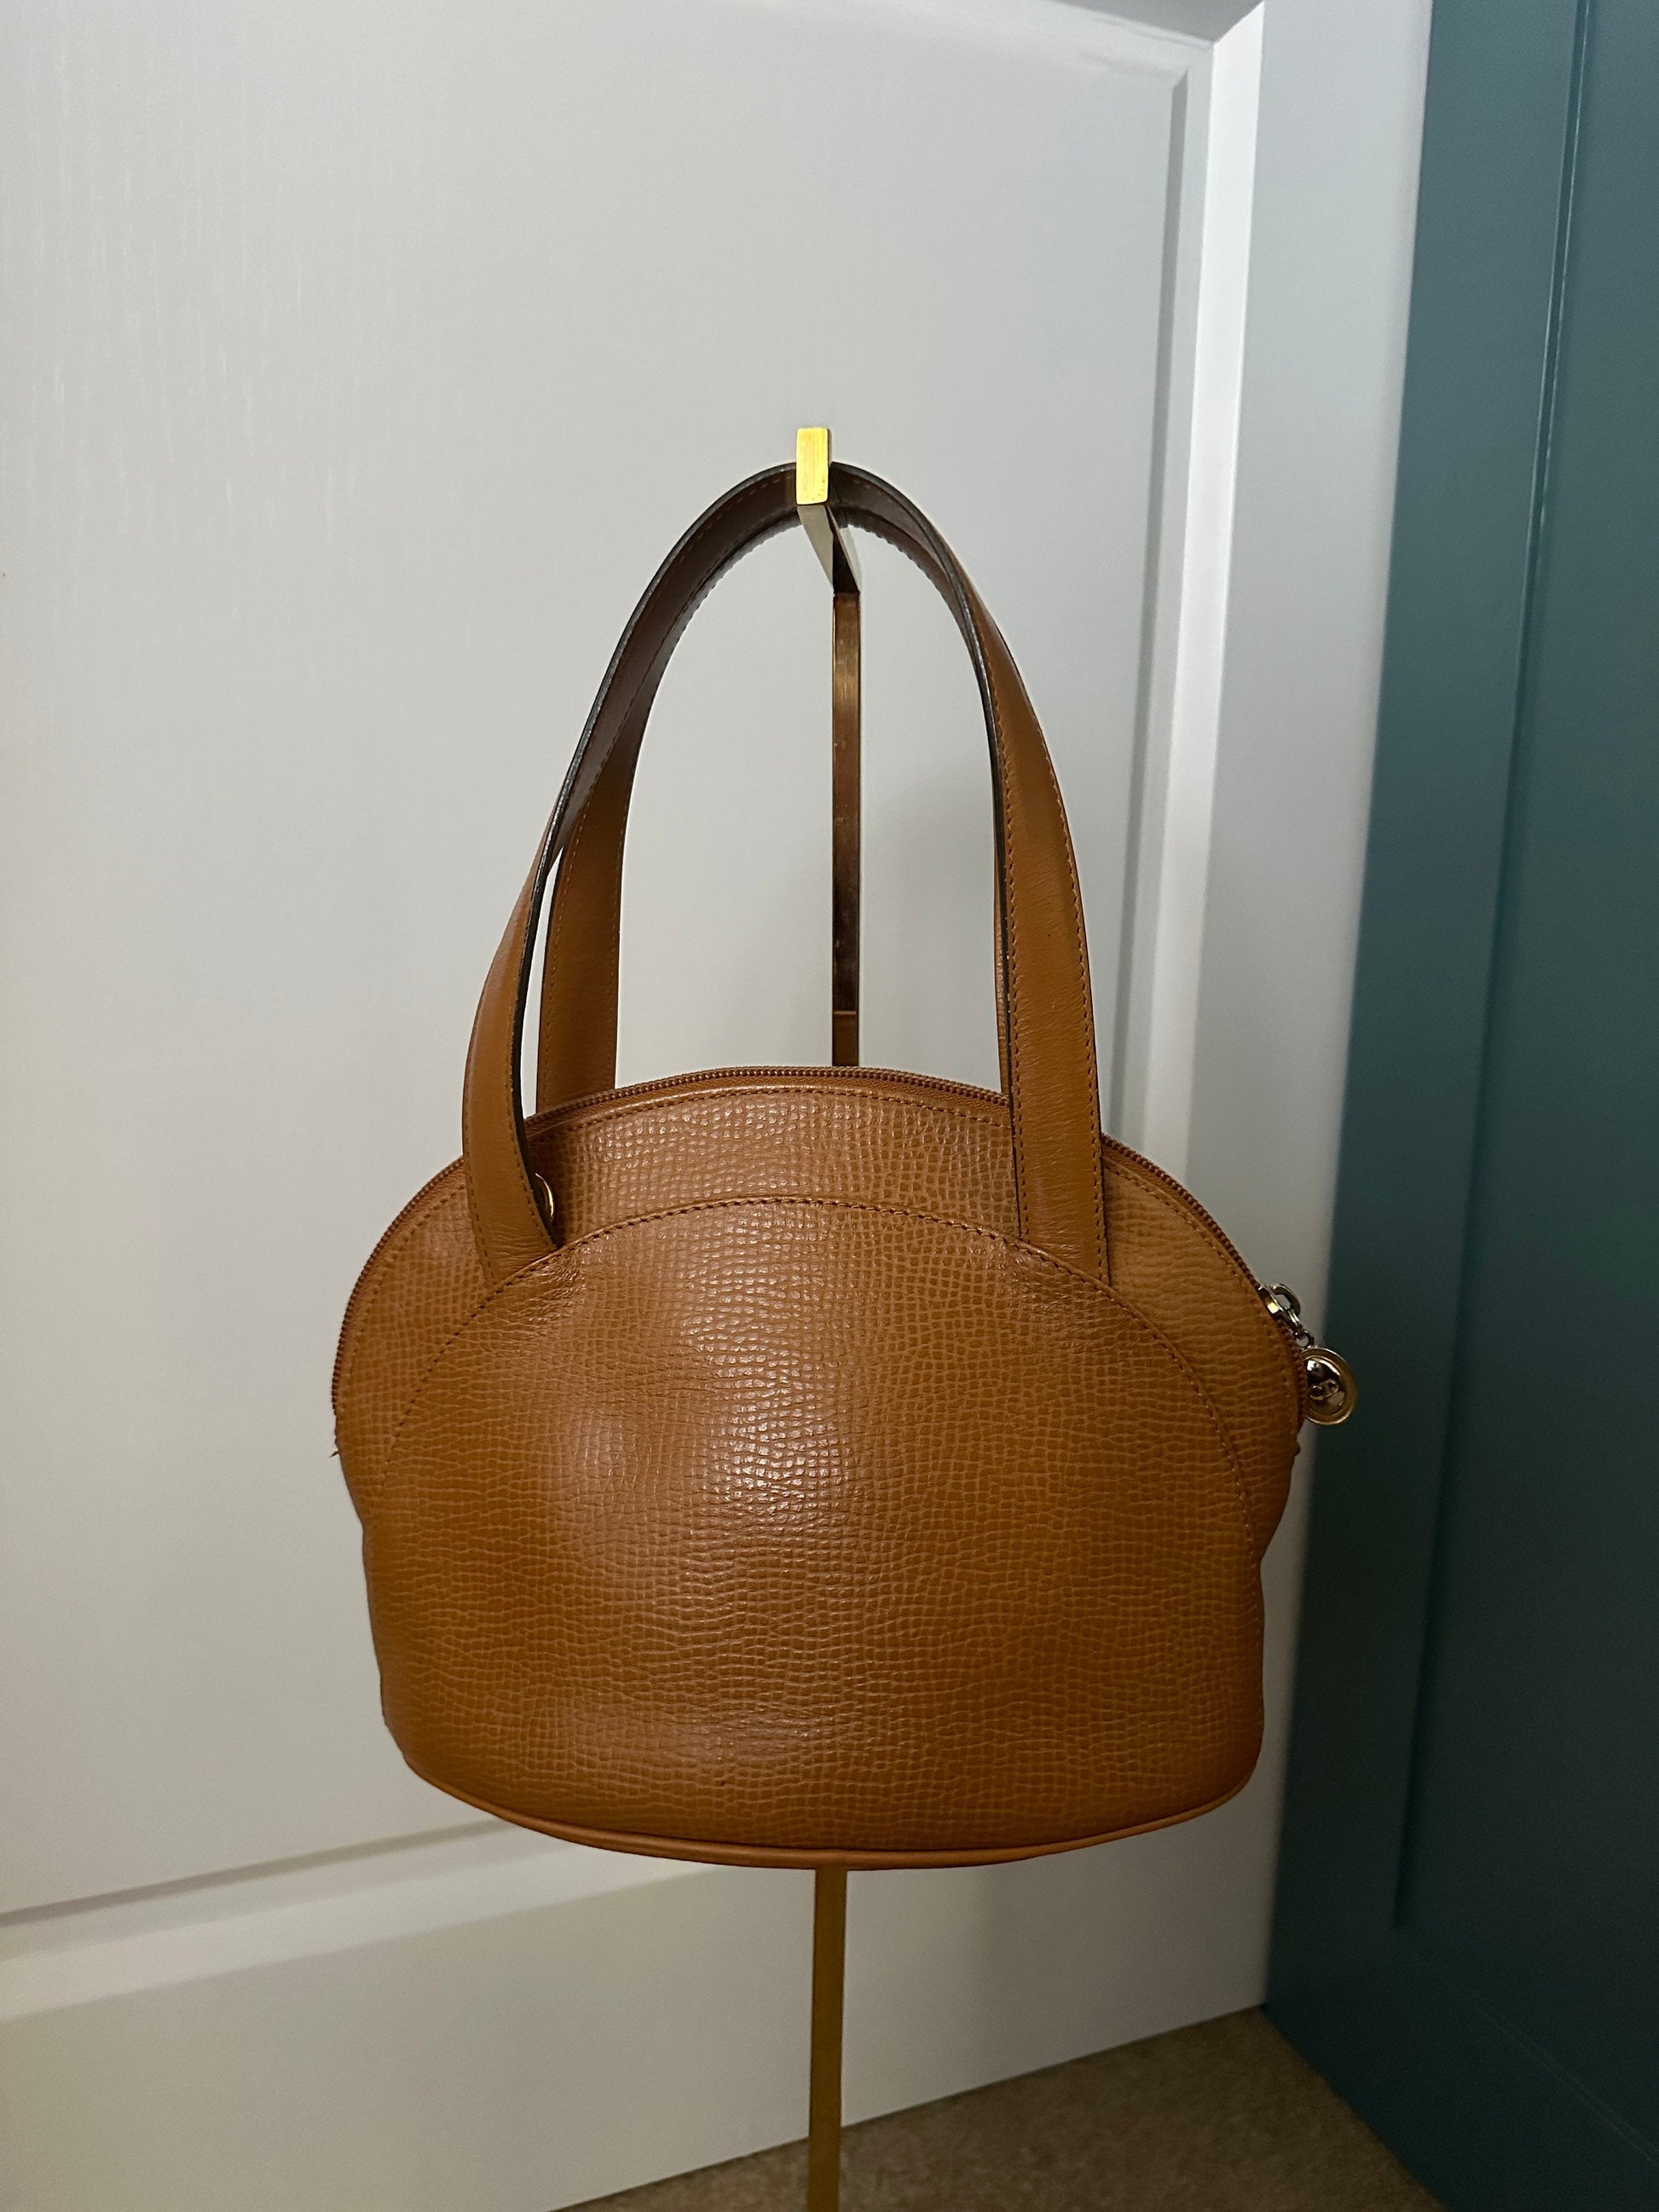 CHRISTIAN DIOR VINTAGE, 100% Authentic Genuine, Leather Hand Bag, Deep Yellow, 2000's, Great Condition, Rare